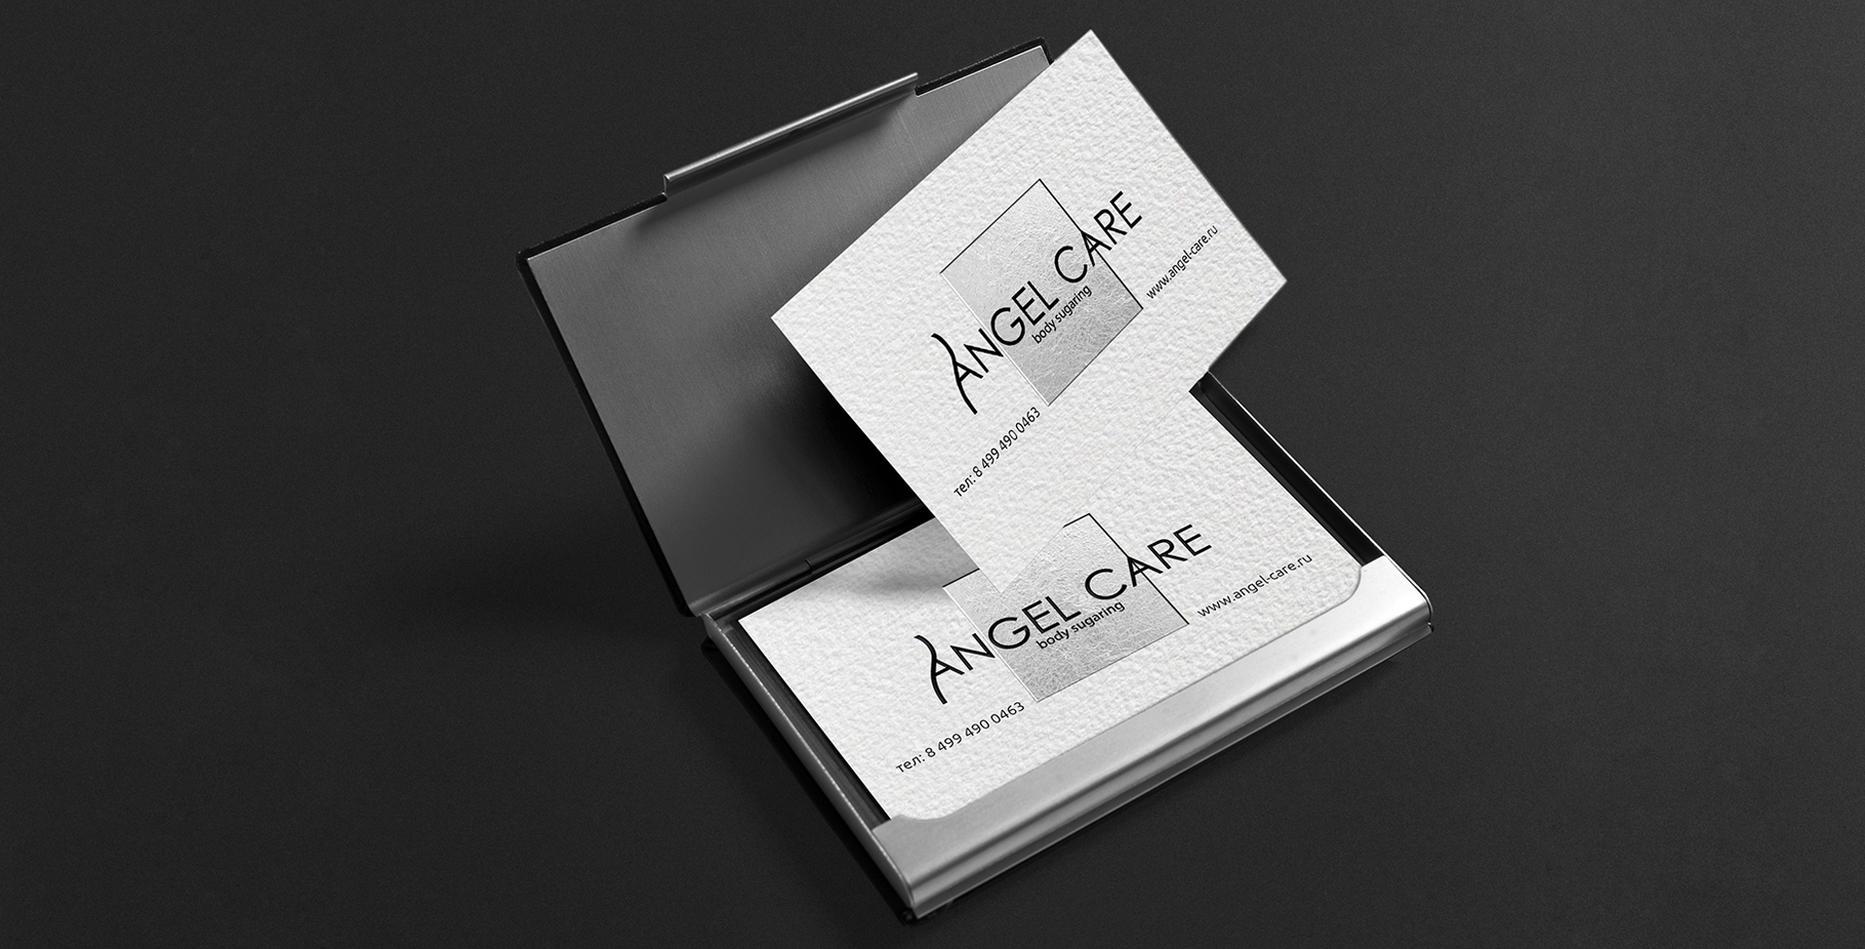 Case: logo, corporate identity, promotional products for Angel Care — Rubarb - Image - 11